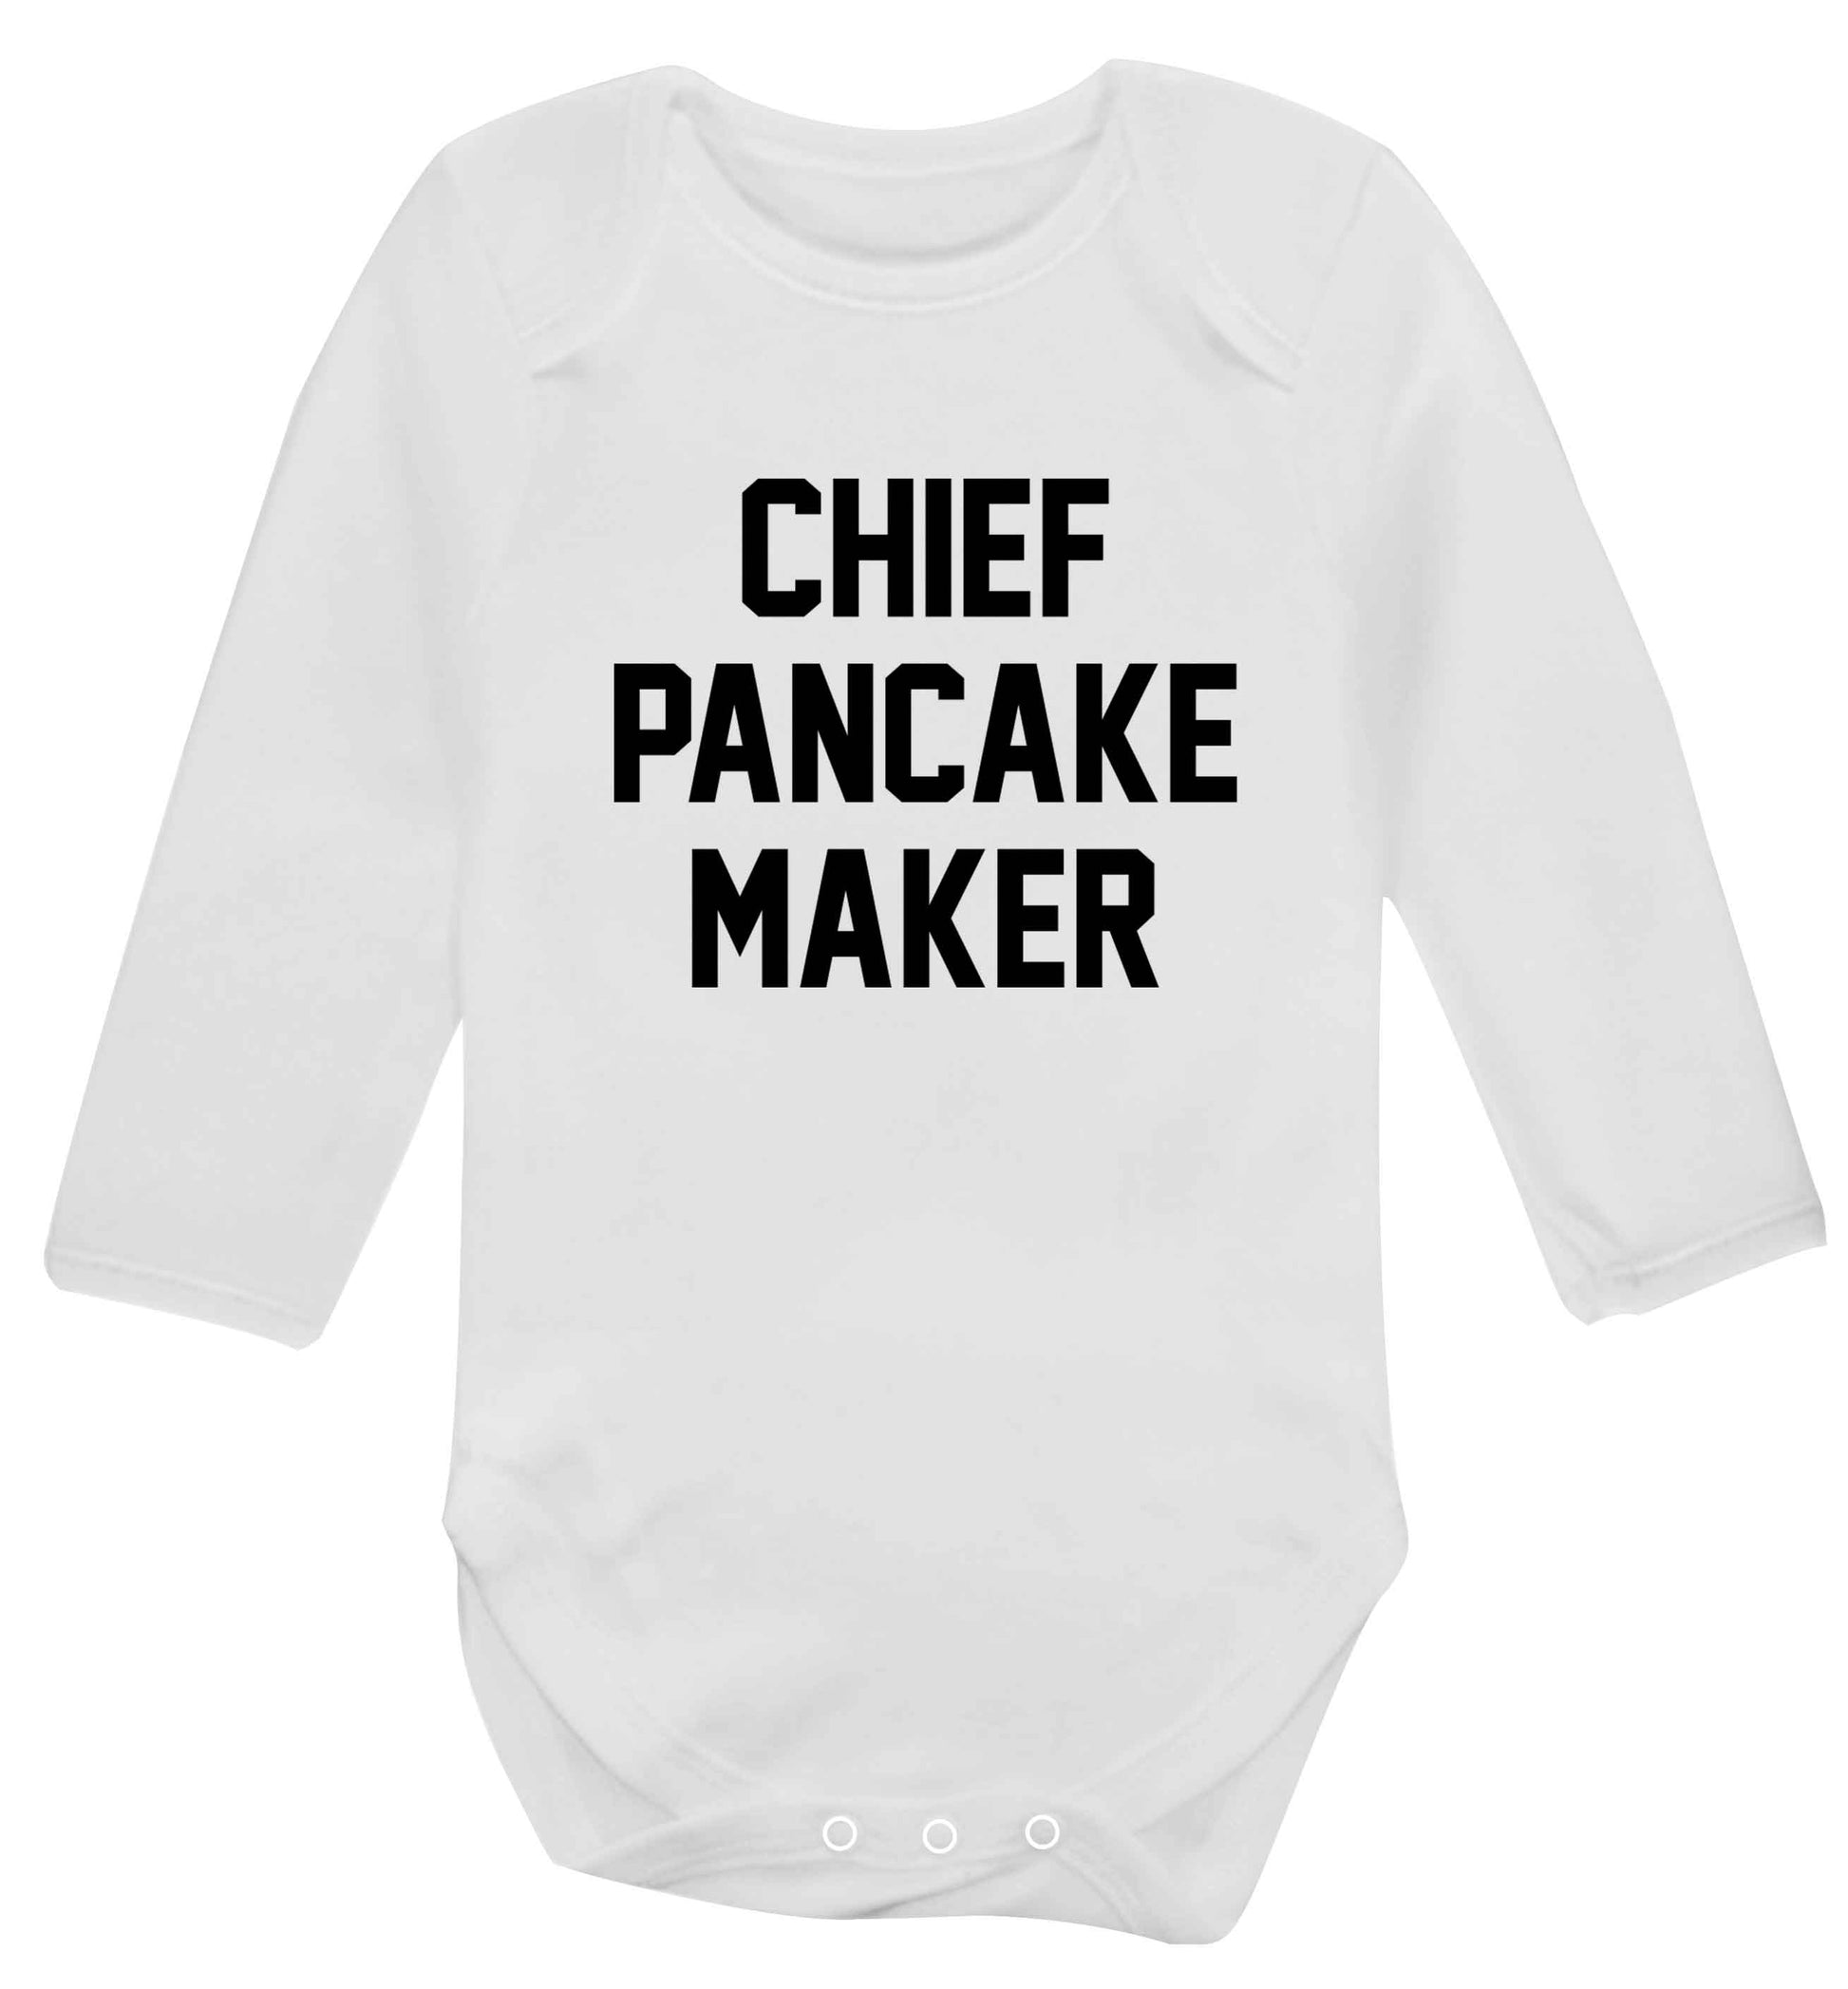 Chief pancake maker baby vest long sleeved white 6-12 months